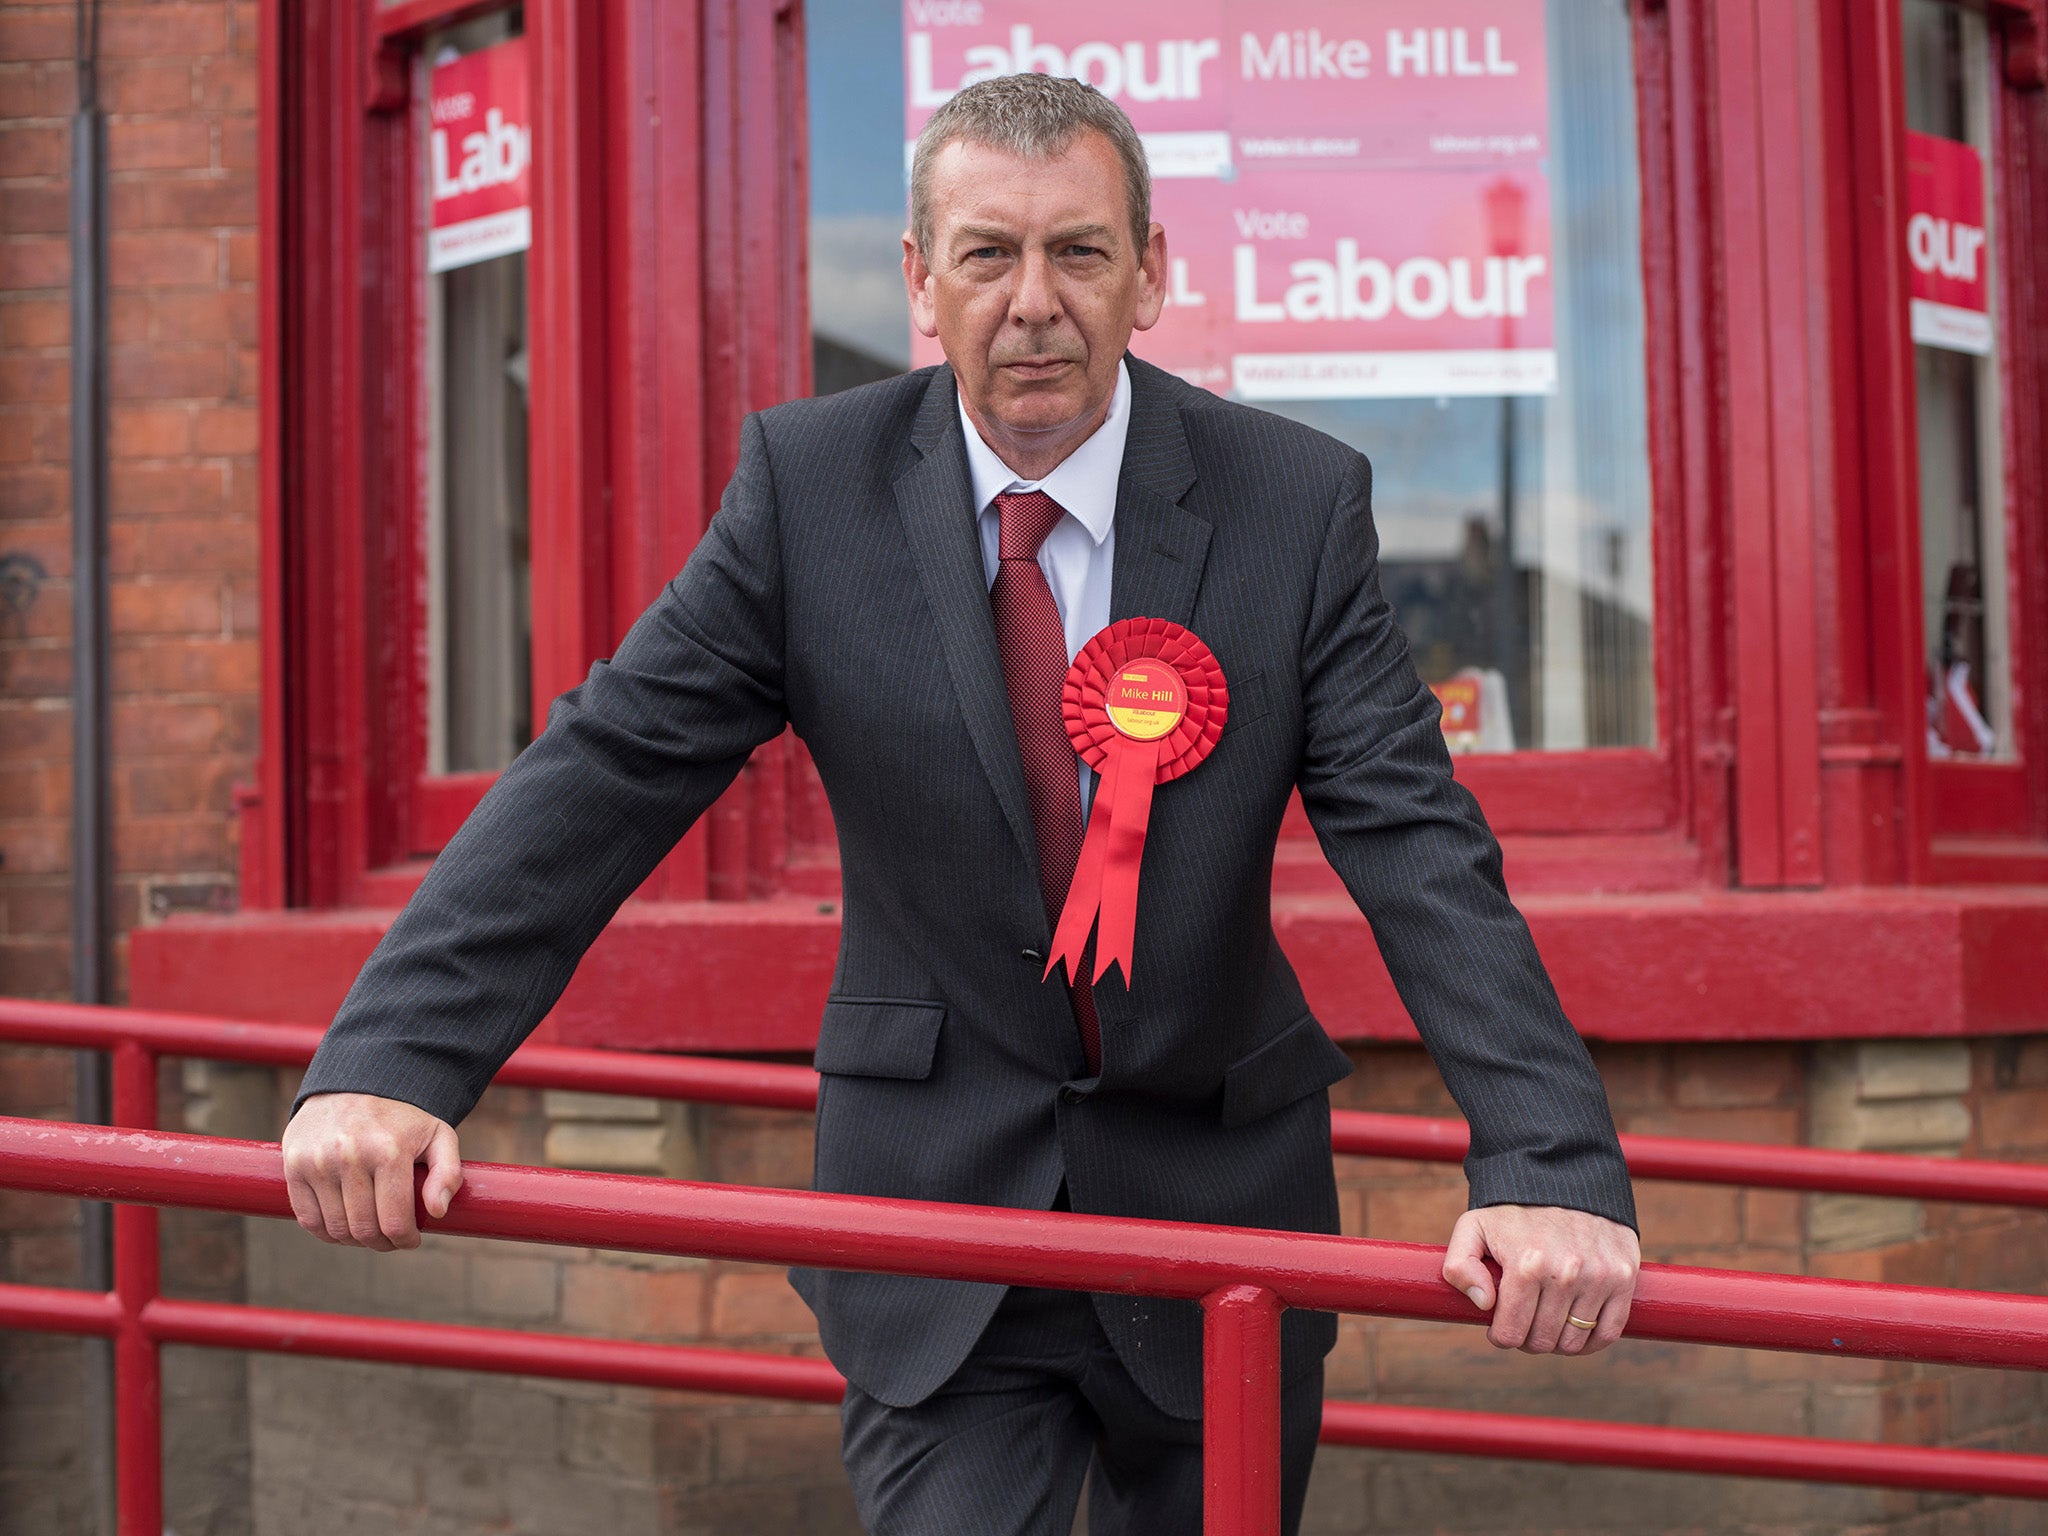 Labour MP Mike Hill briefly had the whip withdrawn over claims he sexually harassed a woman